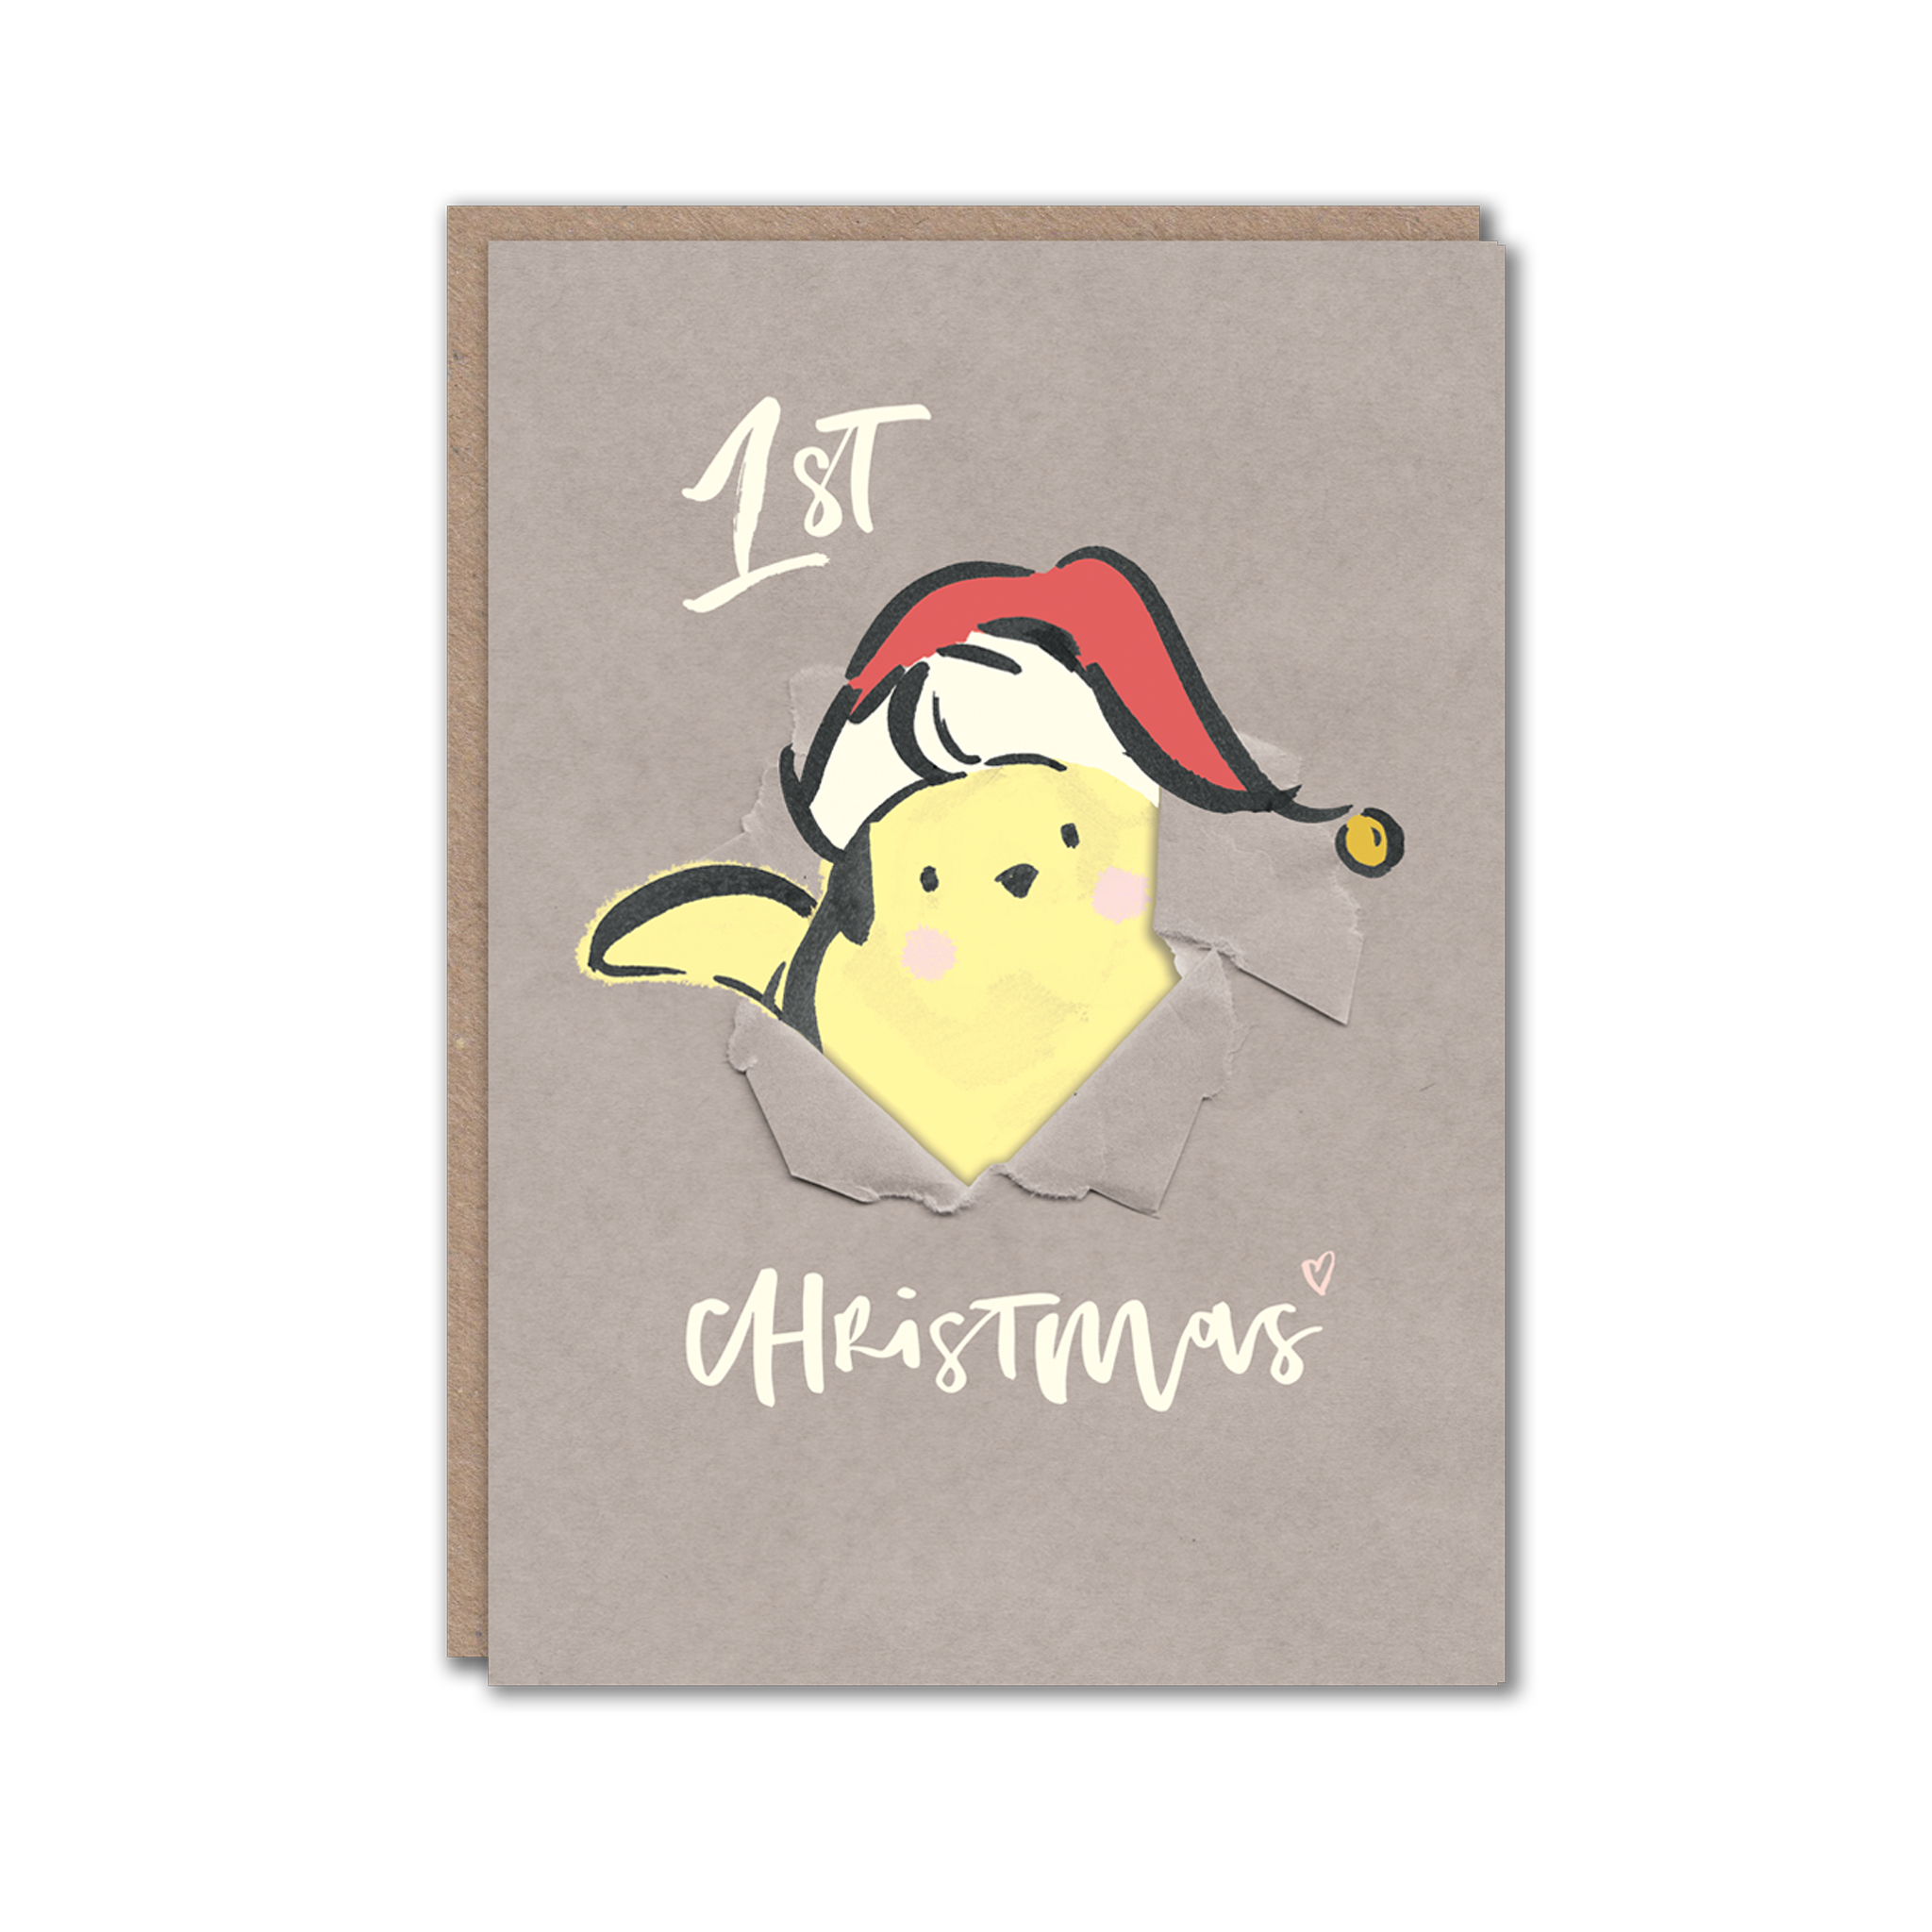 First Christmas Greeting Card